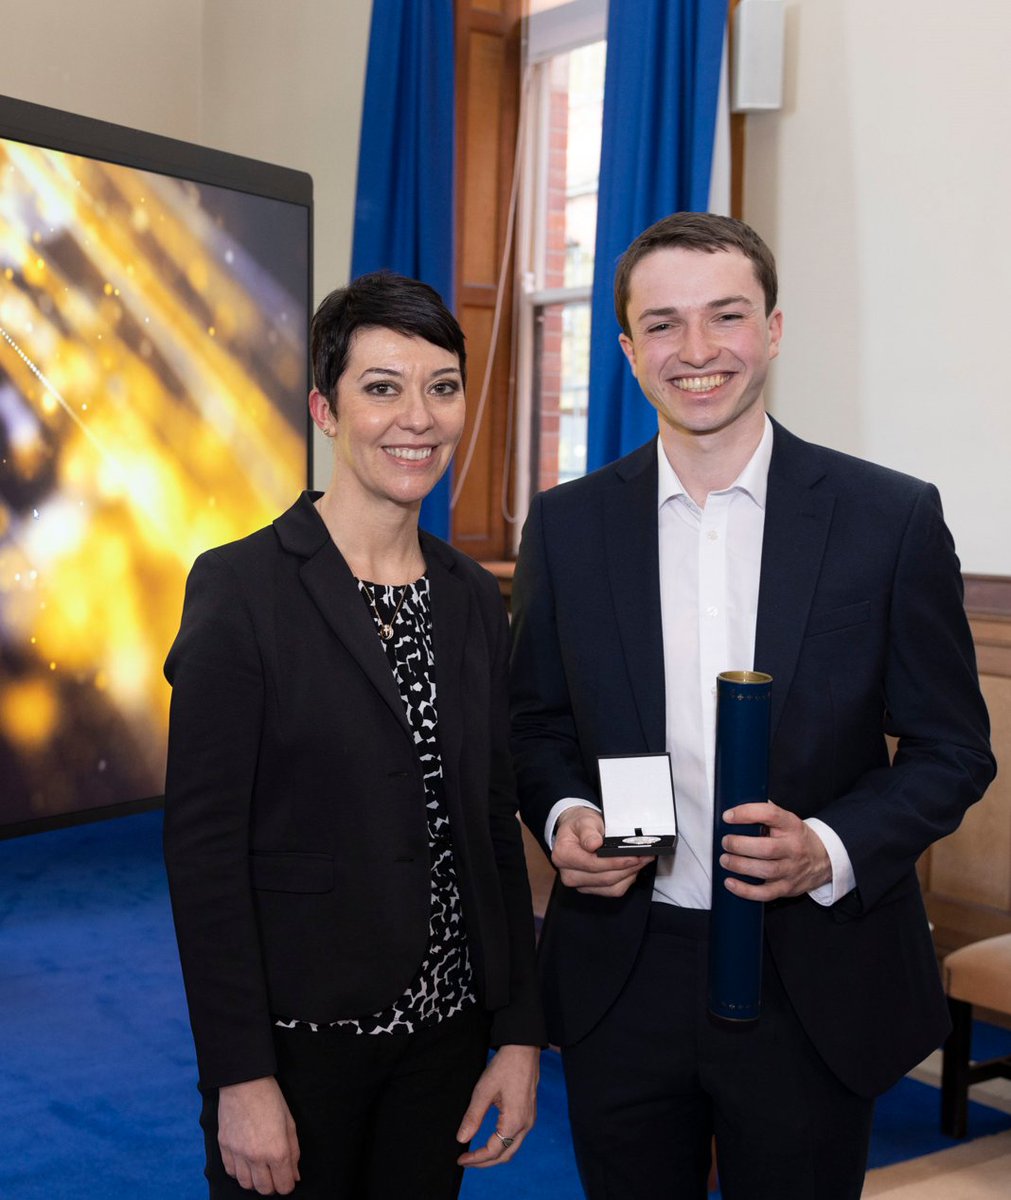 We were delighted to recently host the annual Smurfit Prizes Ceremony which recognises the students who achieve the highest GPA scores in the previous academic year. Congratulations to all who received awards! #SmurfitAwards #SmurfitSchool